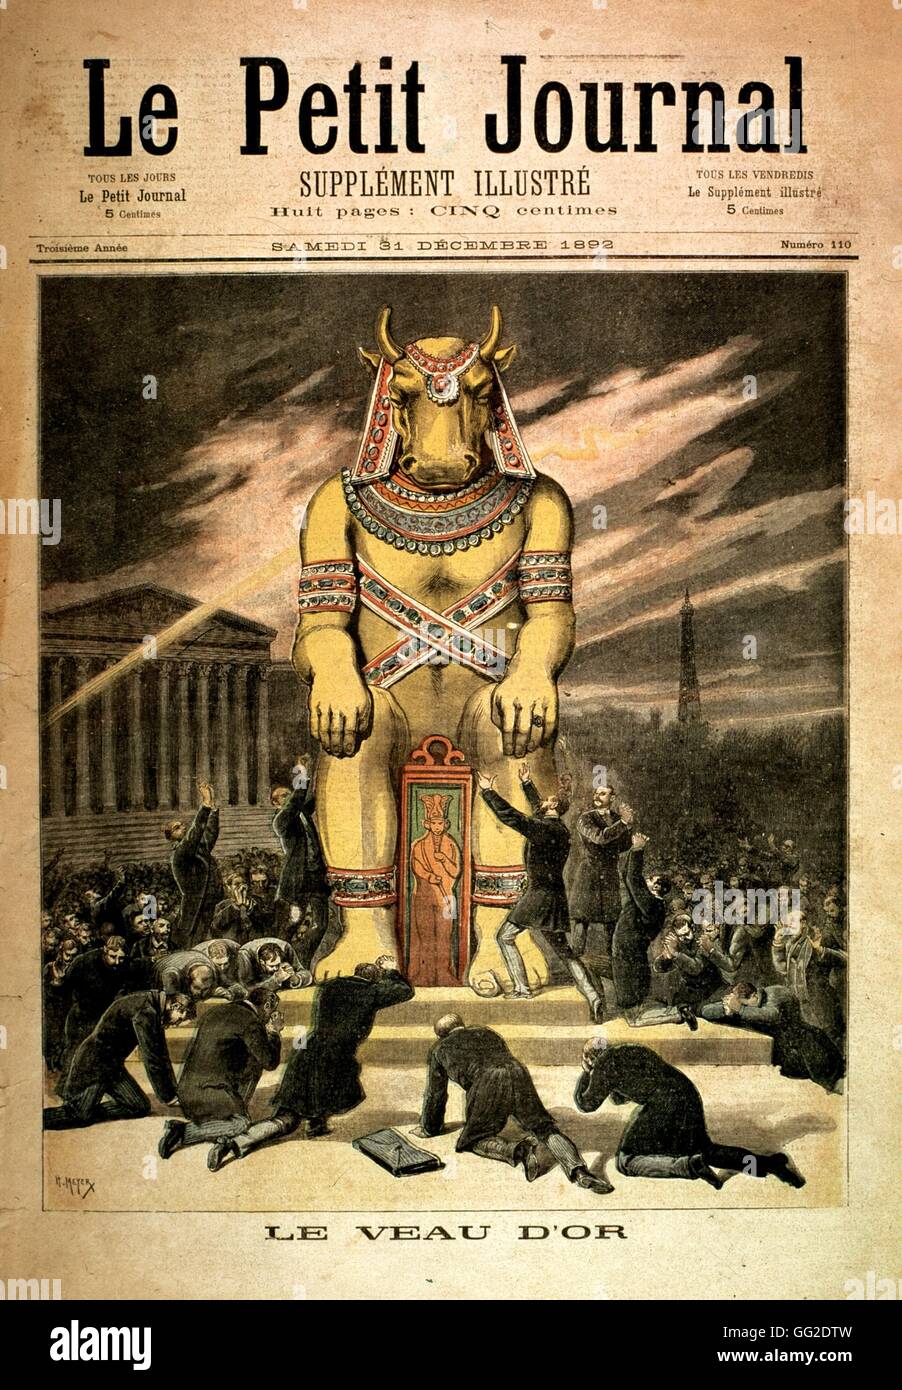 Golden Veal, in 'Le Petit journal' December 31, 1892 Stock Photo